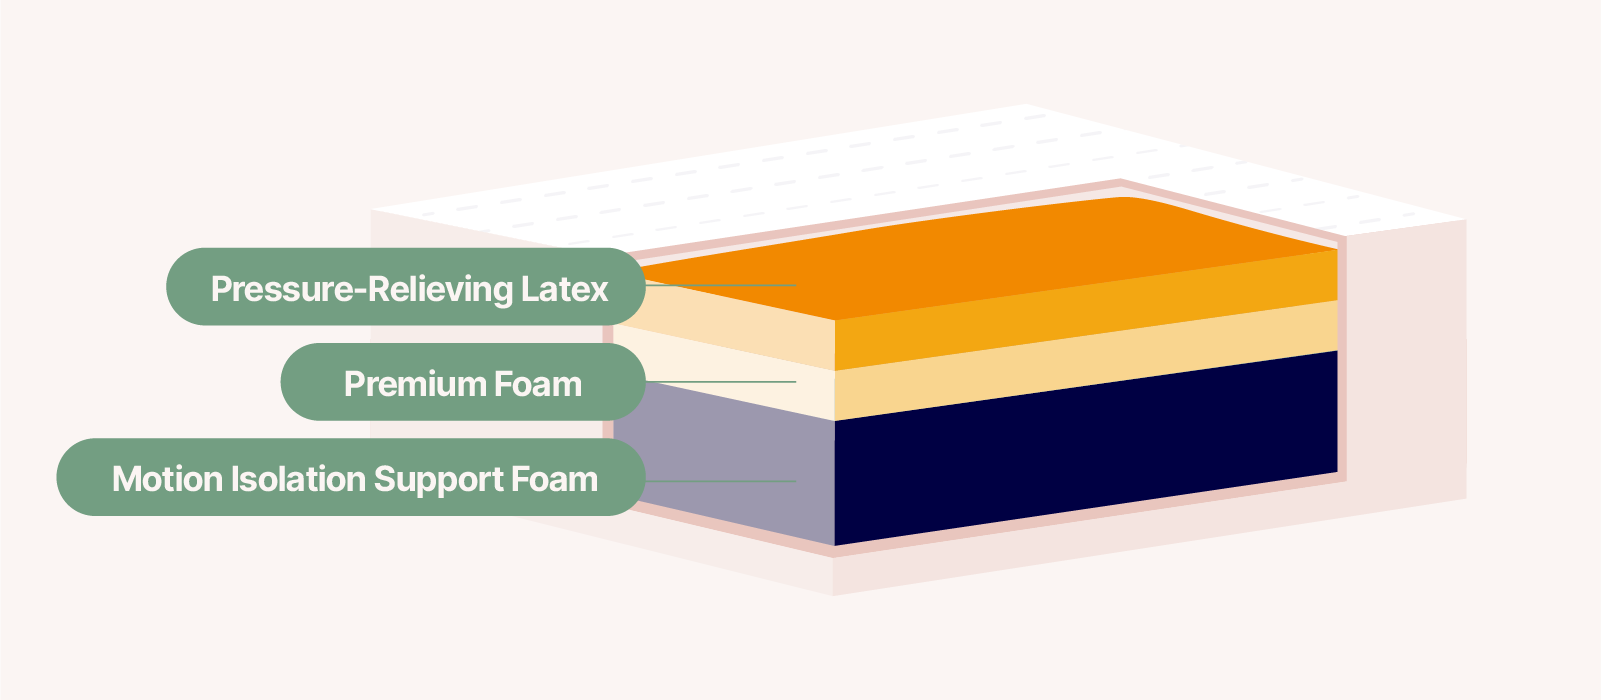 illustration of the inner components of a typical latex mattress three layers within the mattress are shown text indicates that the top layer of the mattress is pressure relieving latex the middle layer is premium foam and the base layer is motion isolation support foam